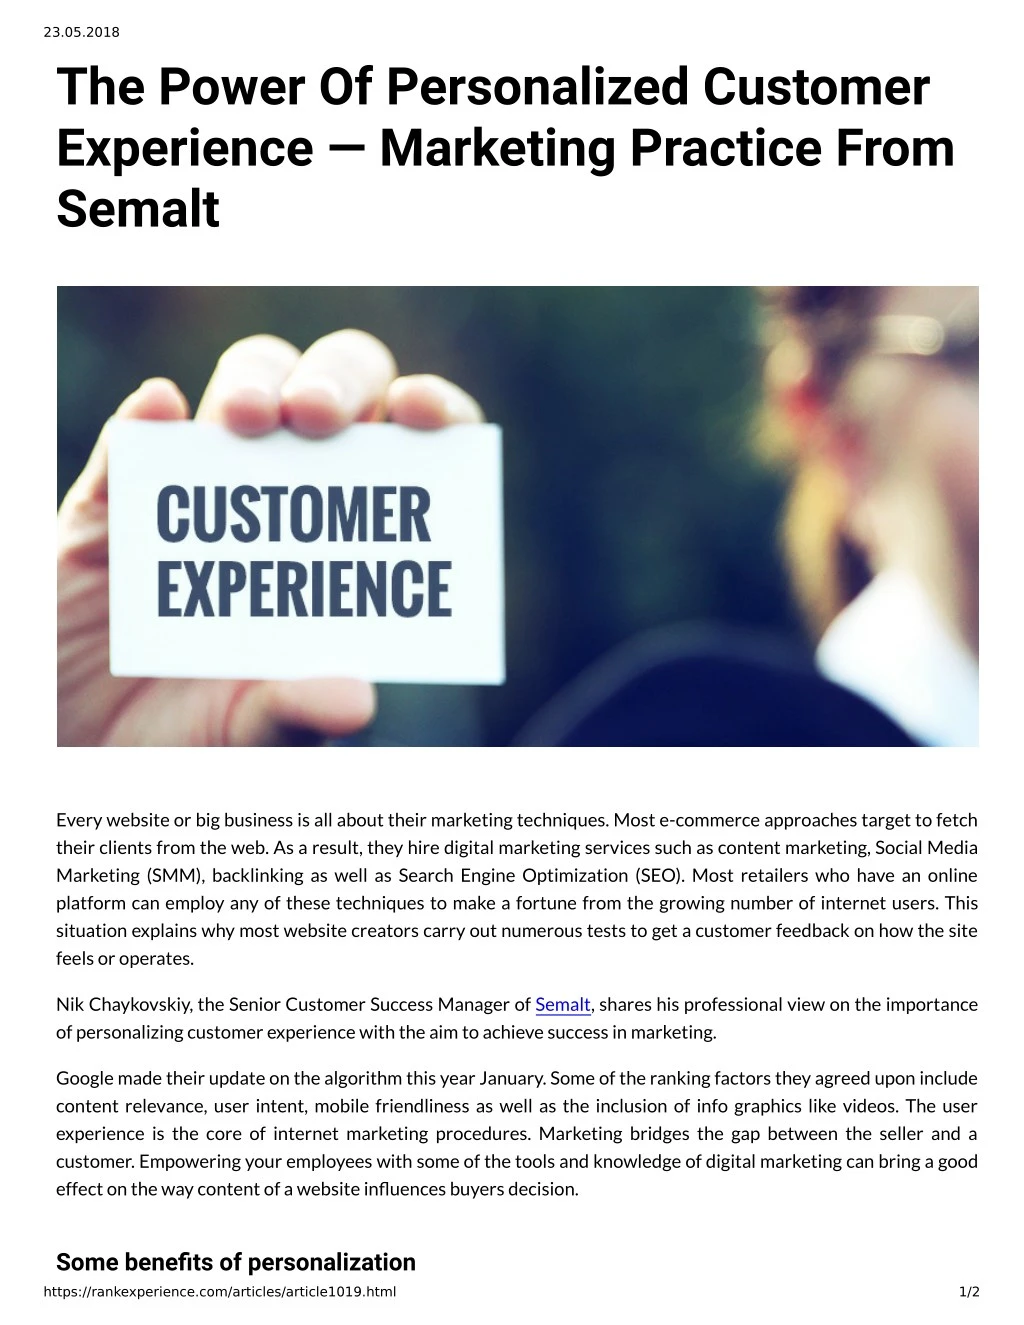 23 05 2018 the power of personalized customer